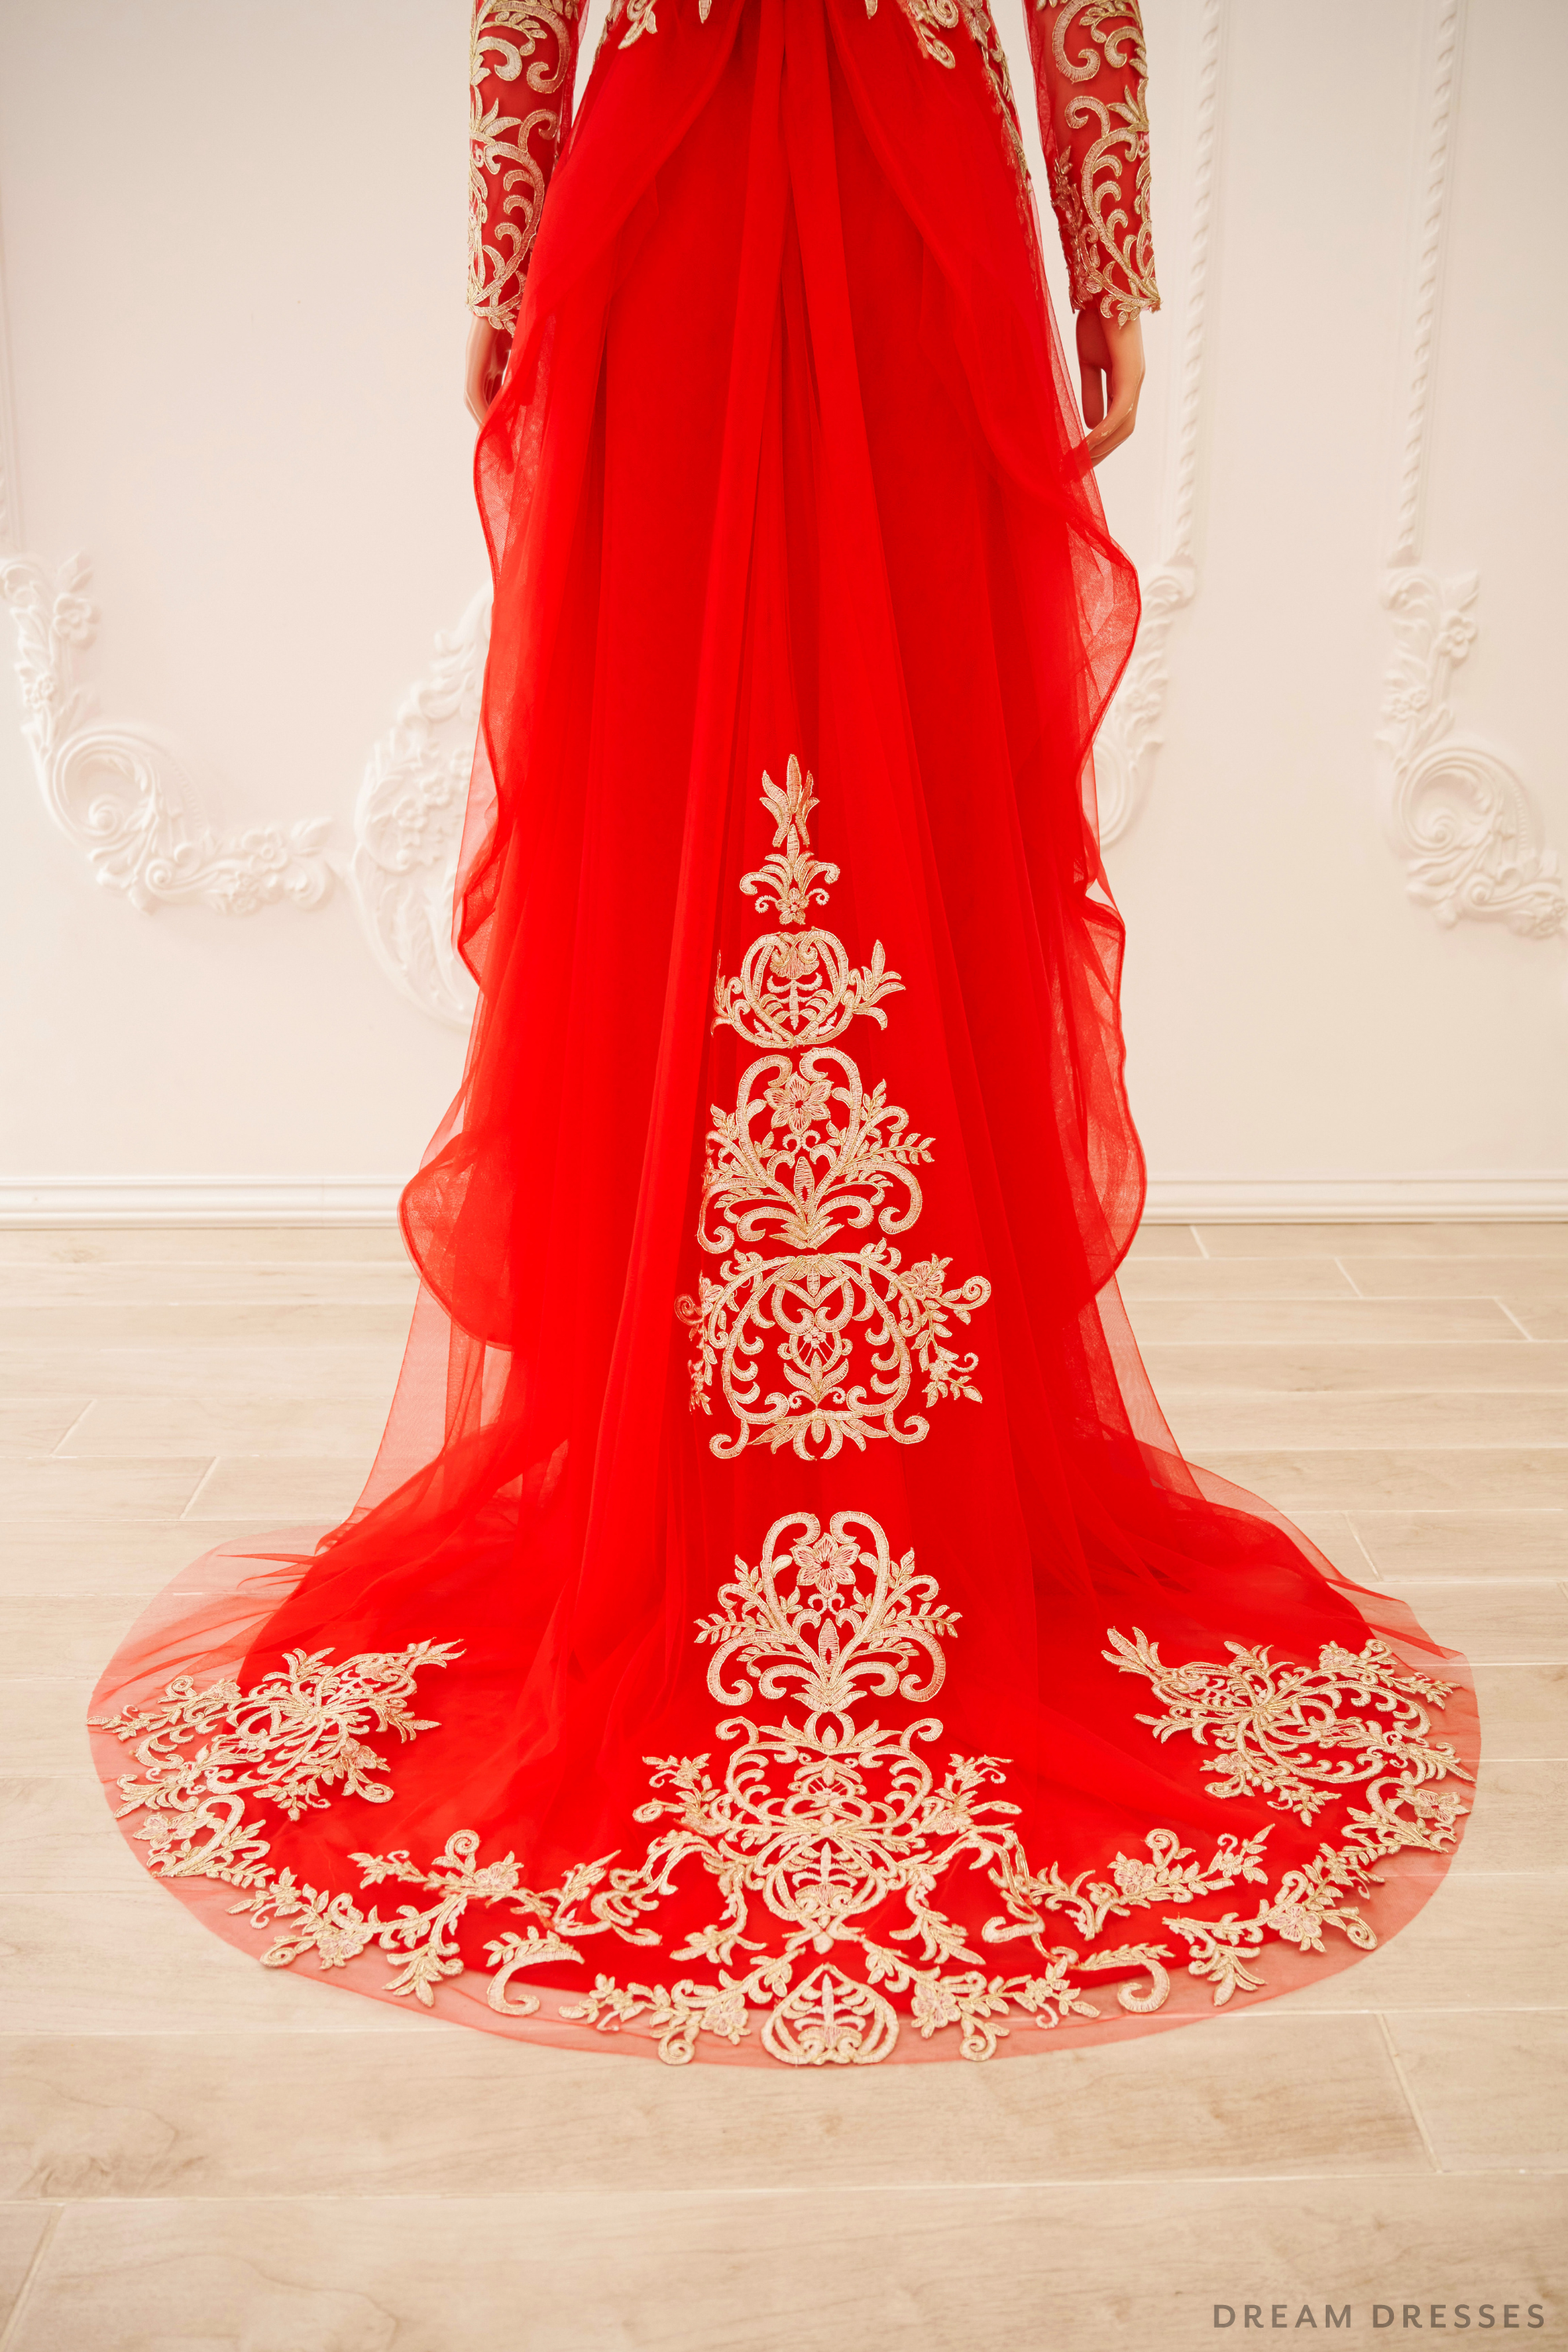 Red Bridal Ao Dai | Vietnamese Traditional Bridal Dress with Gold Lace (#GIATUE)